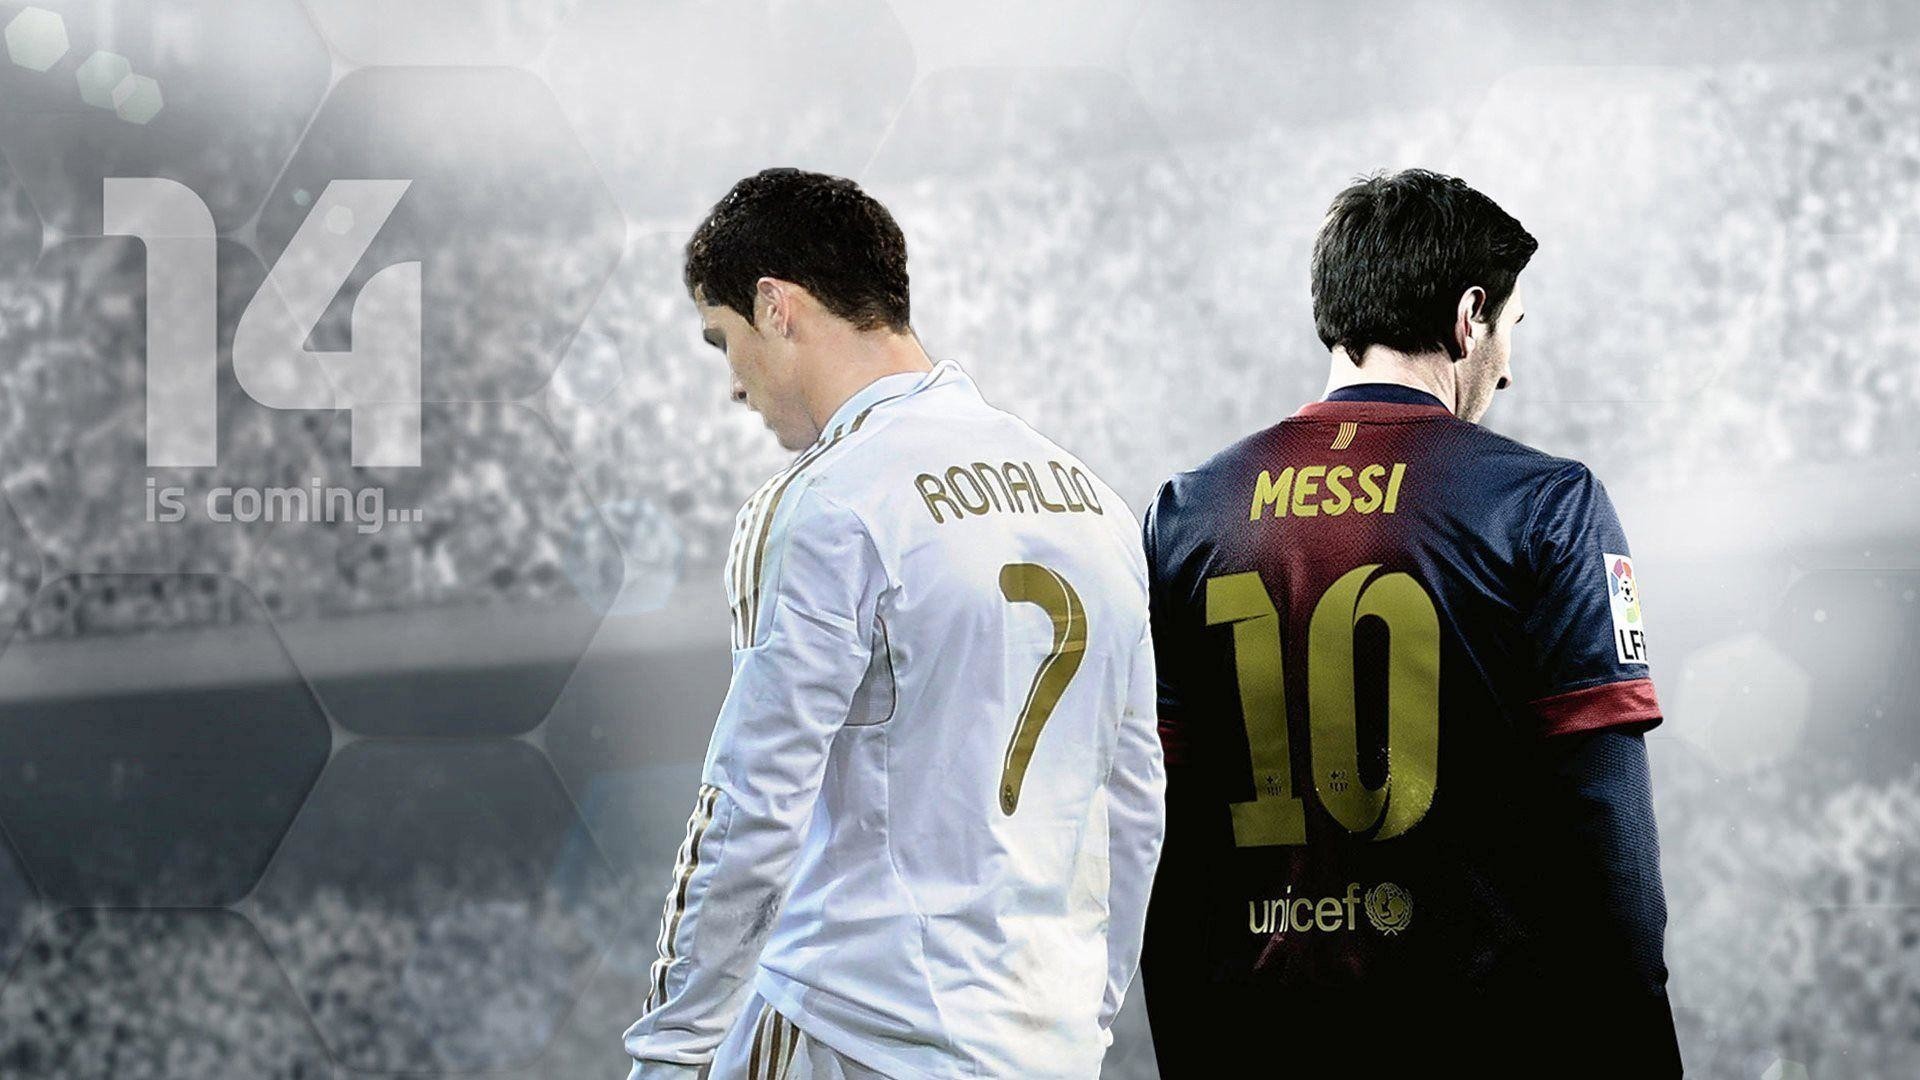 1920x1080  Collection of messi vs ronaldo wallpaper on Wall-Papers.info